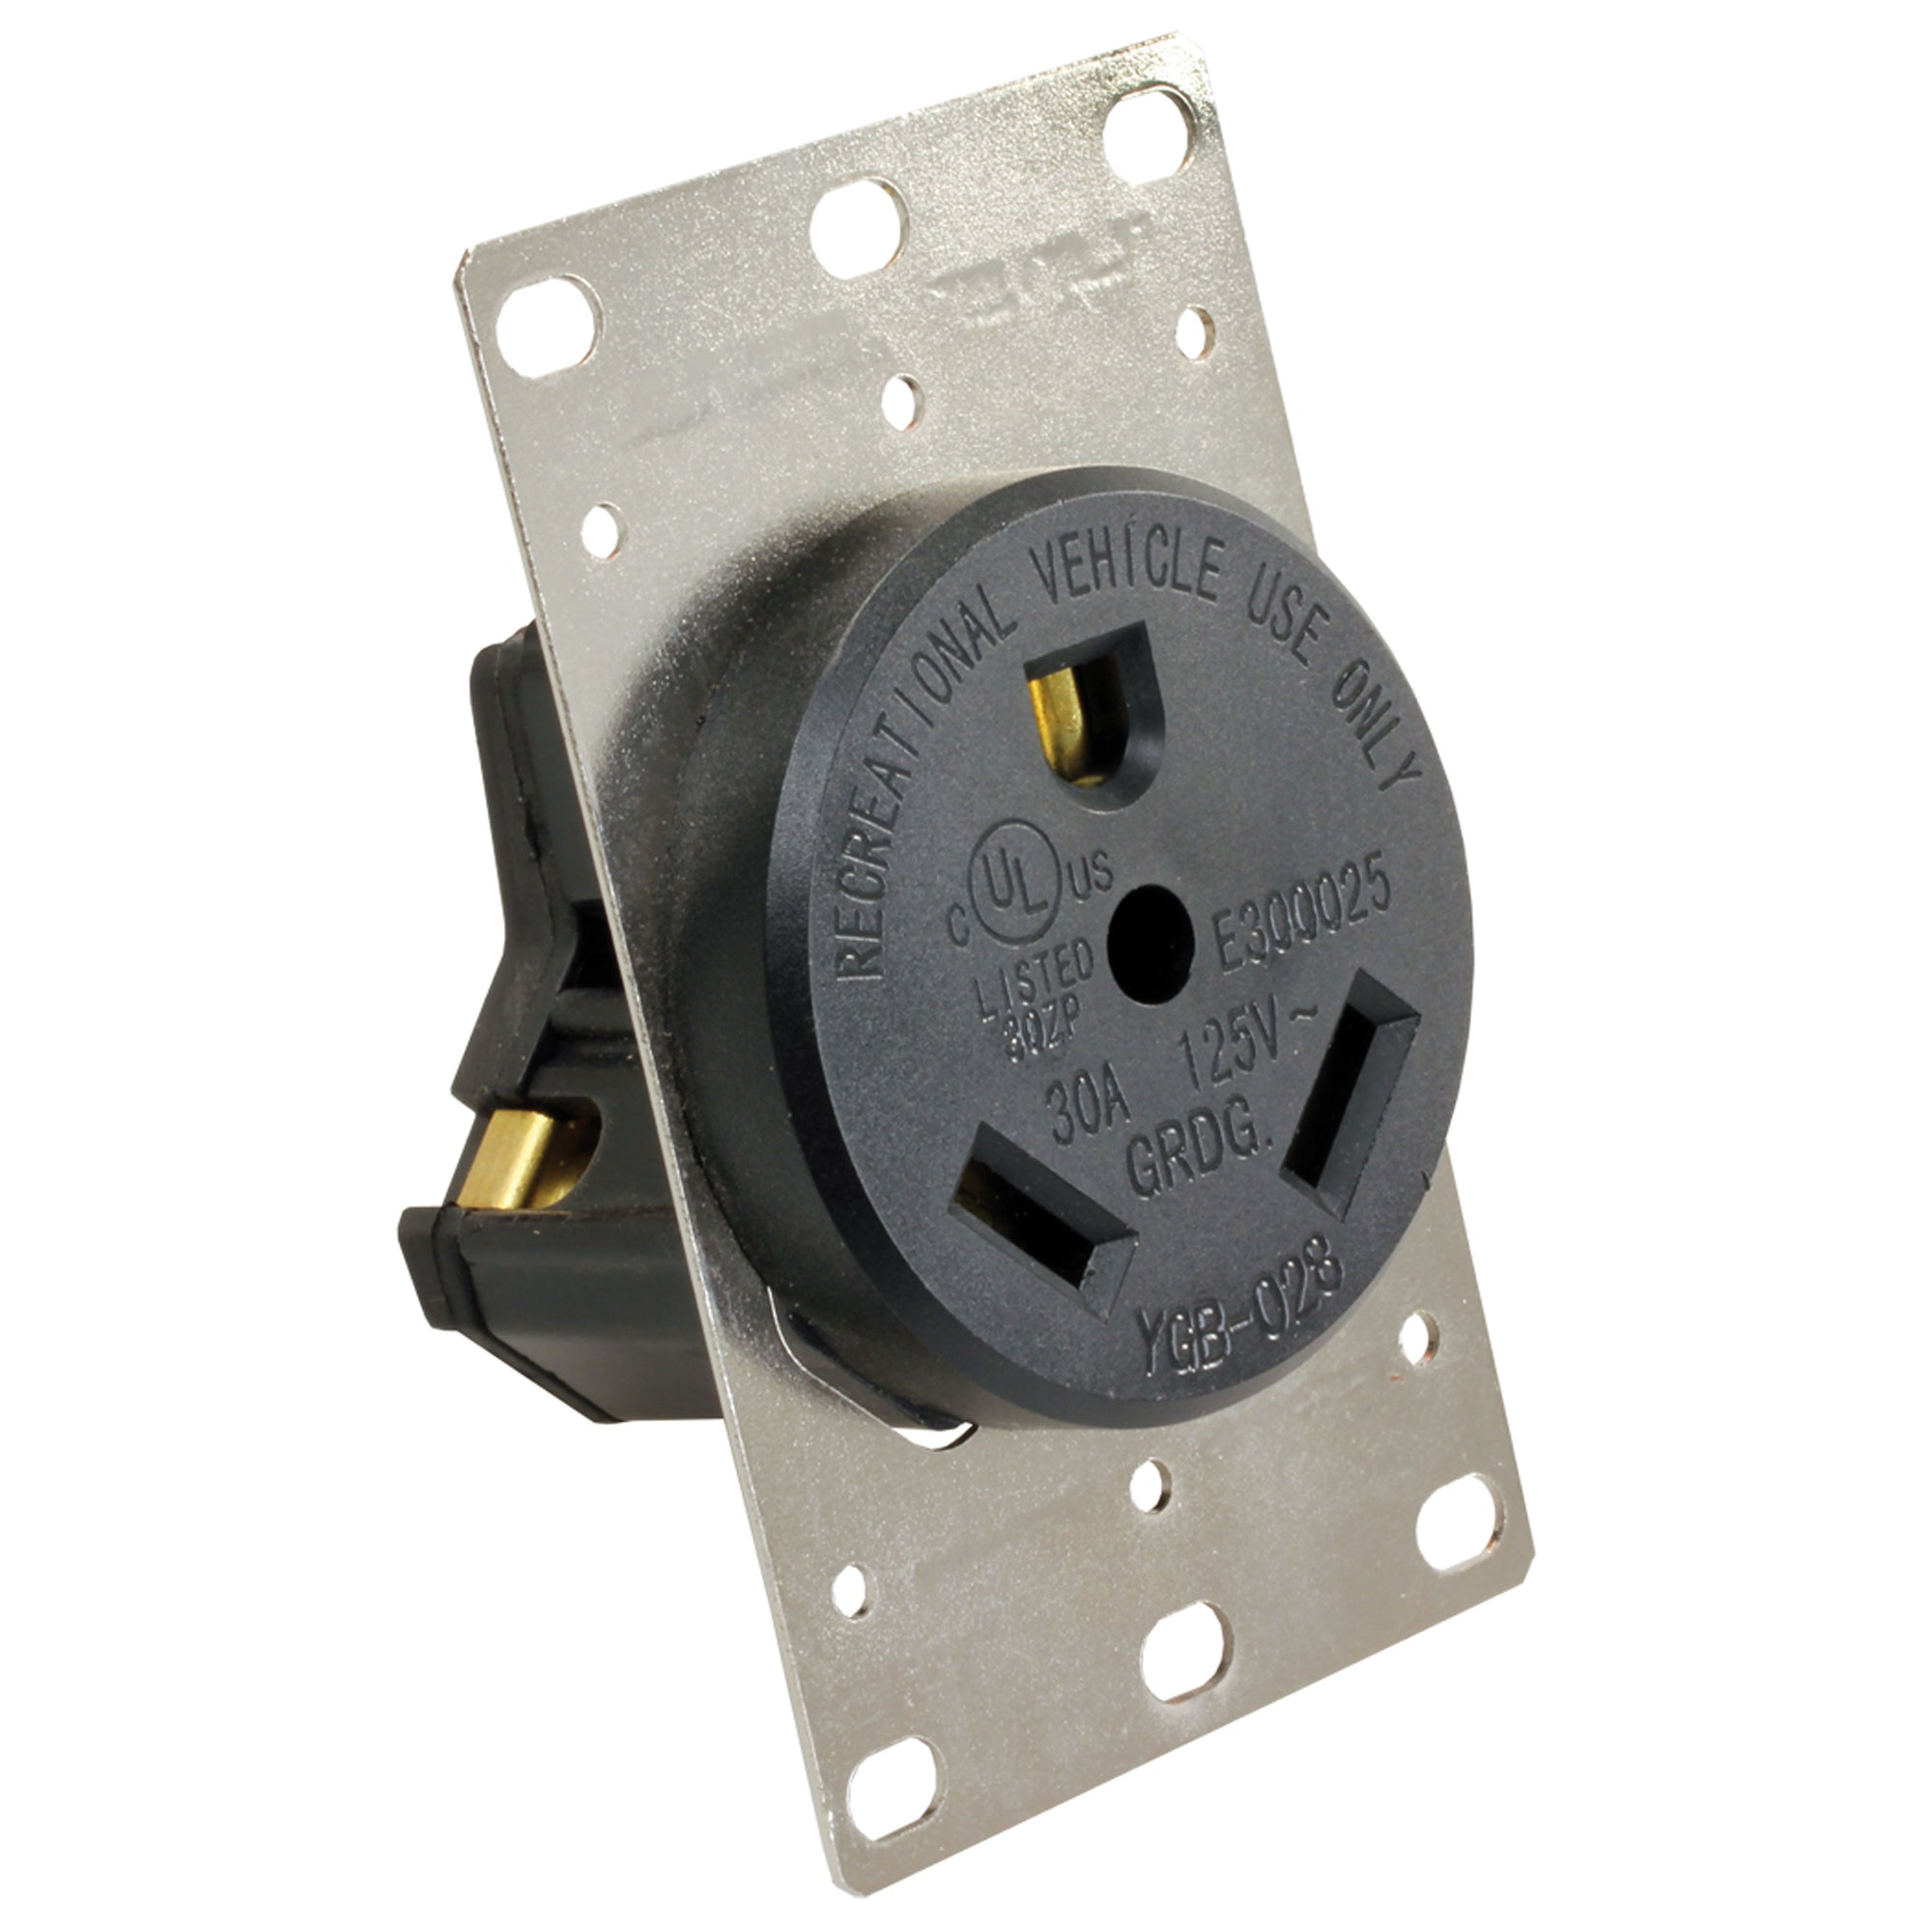 JR Products 15075 30 Amp Receptacle with Mounting Plate